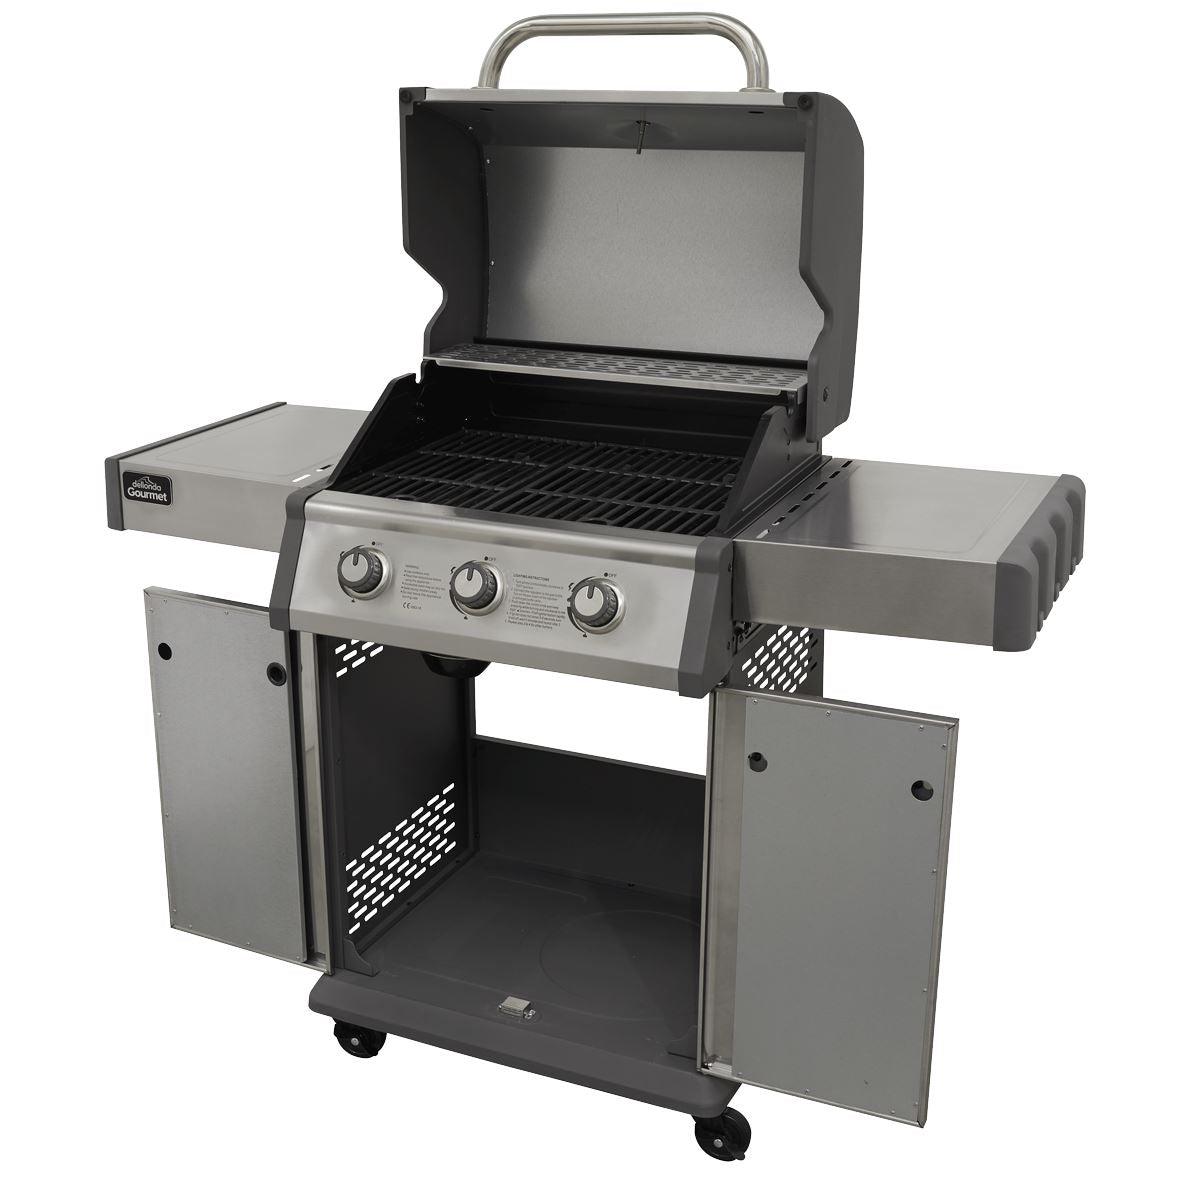 Dellonda 3 Burner Deluxe Gas BBQ Grill with Piezo Ignition & Wheels - Stainless Steel DG16 - Tools 2U Direct SW